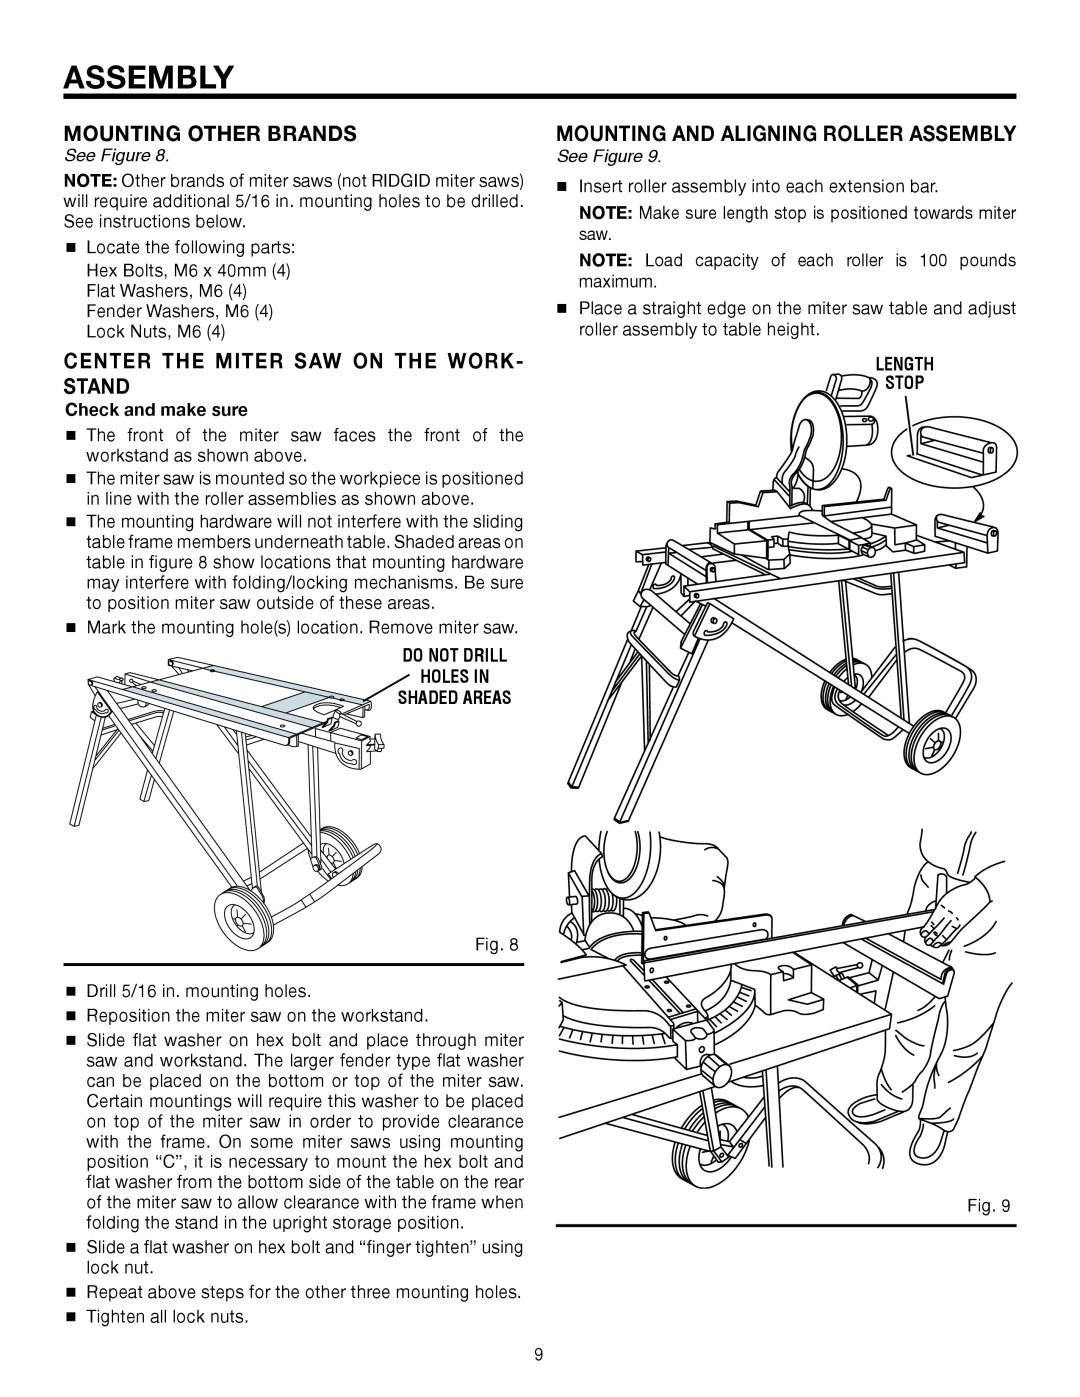 RIDGID AC99402 manual Mounting Other Brands, Center The Miter Saw On The Work- Stand, Mounting And Aligning Roller Assembly 